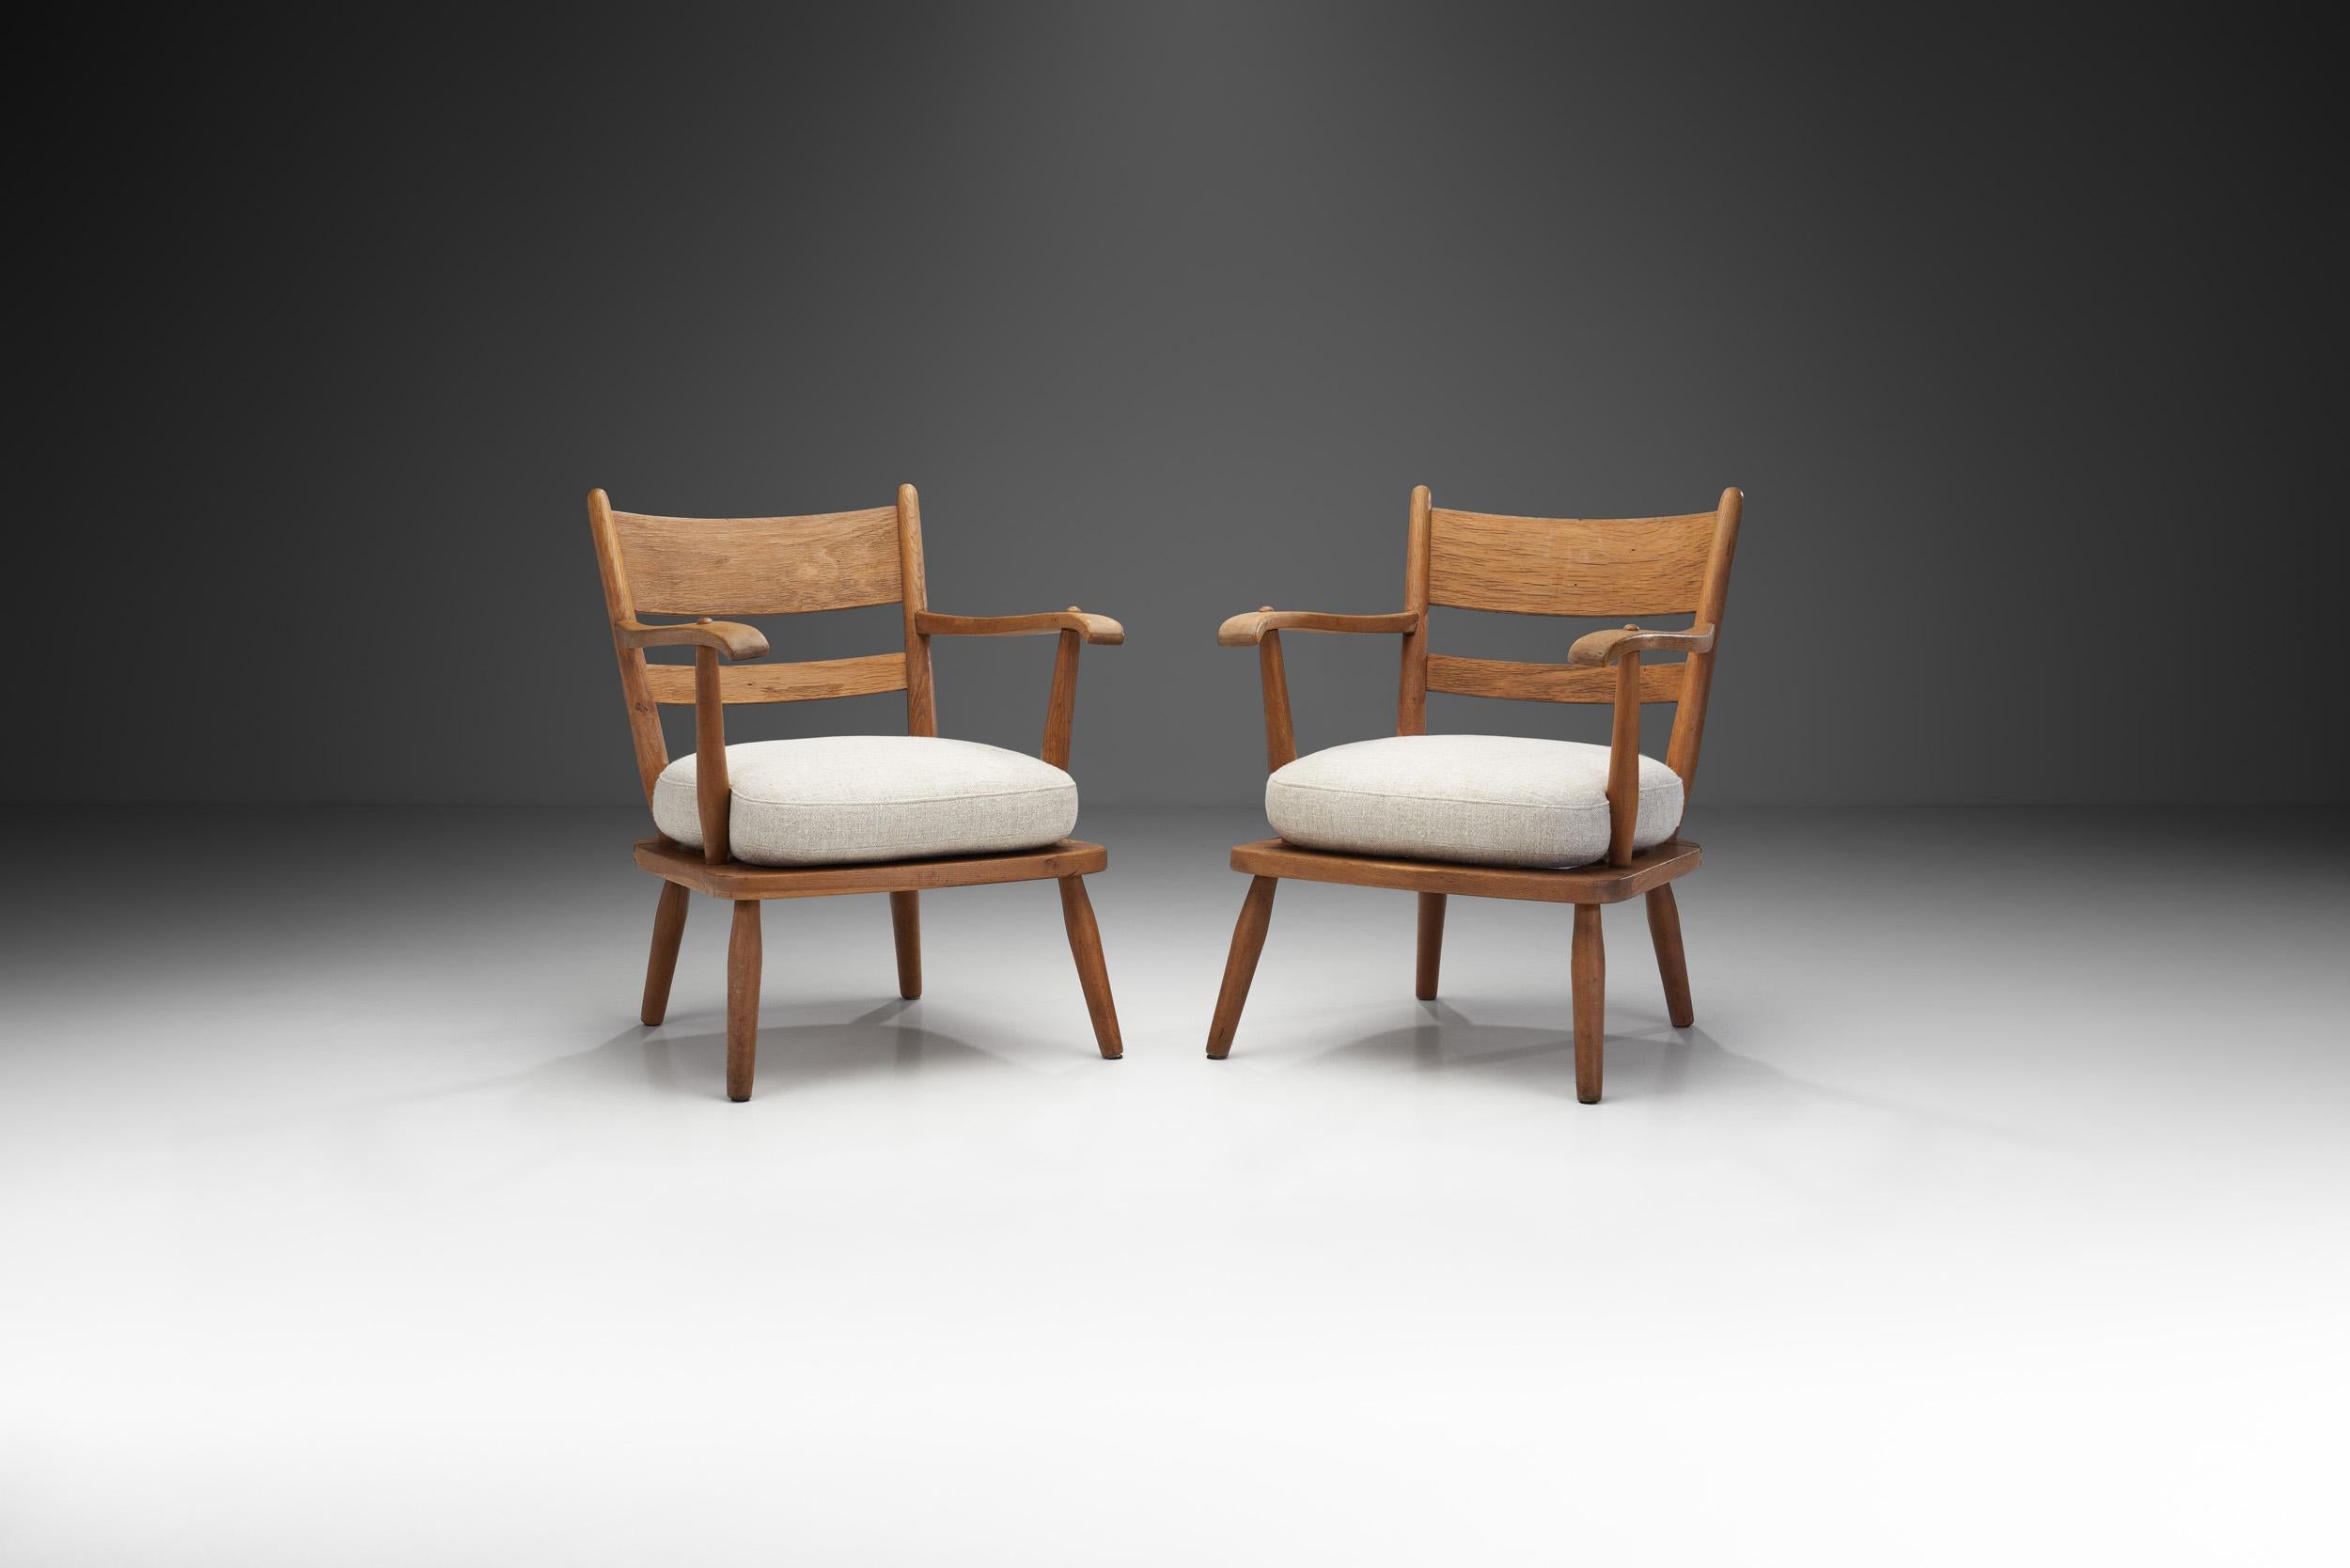 Most of the stunning minimalist designs from the turn of the century to the 1960s, termed 